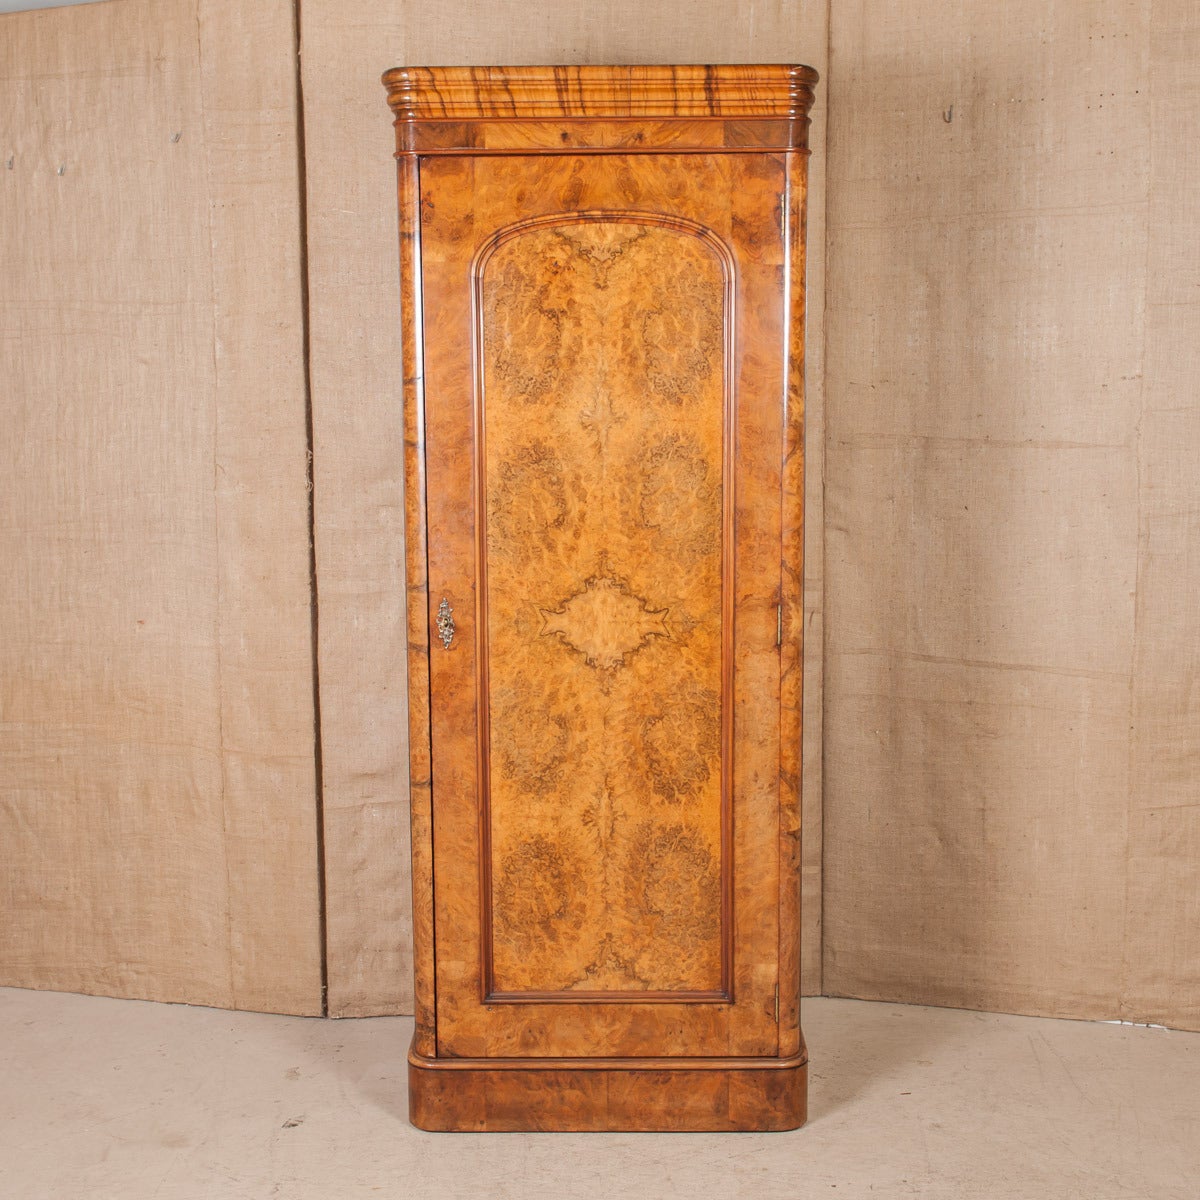 Very fine, antique French Louis Philippe period bonnetiere. Long, arched door panel in walnut with book-matched front allowing for the uninterrupted enjoyment of the beauty of its wood grain. A stunning cabinet that would work beautifully in a